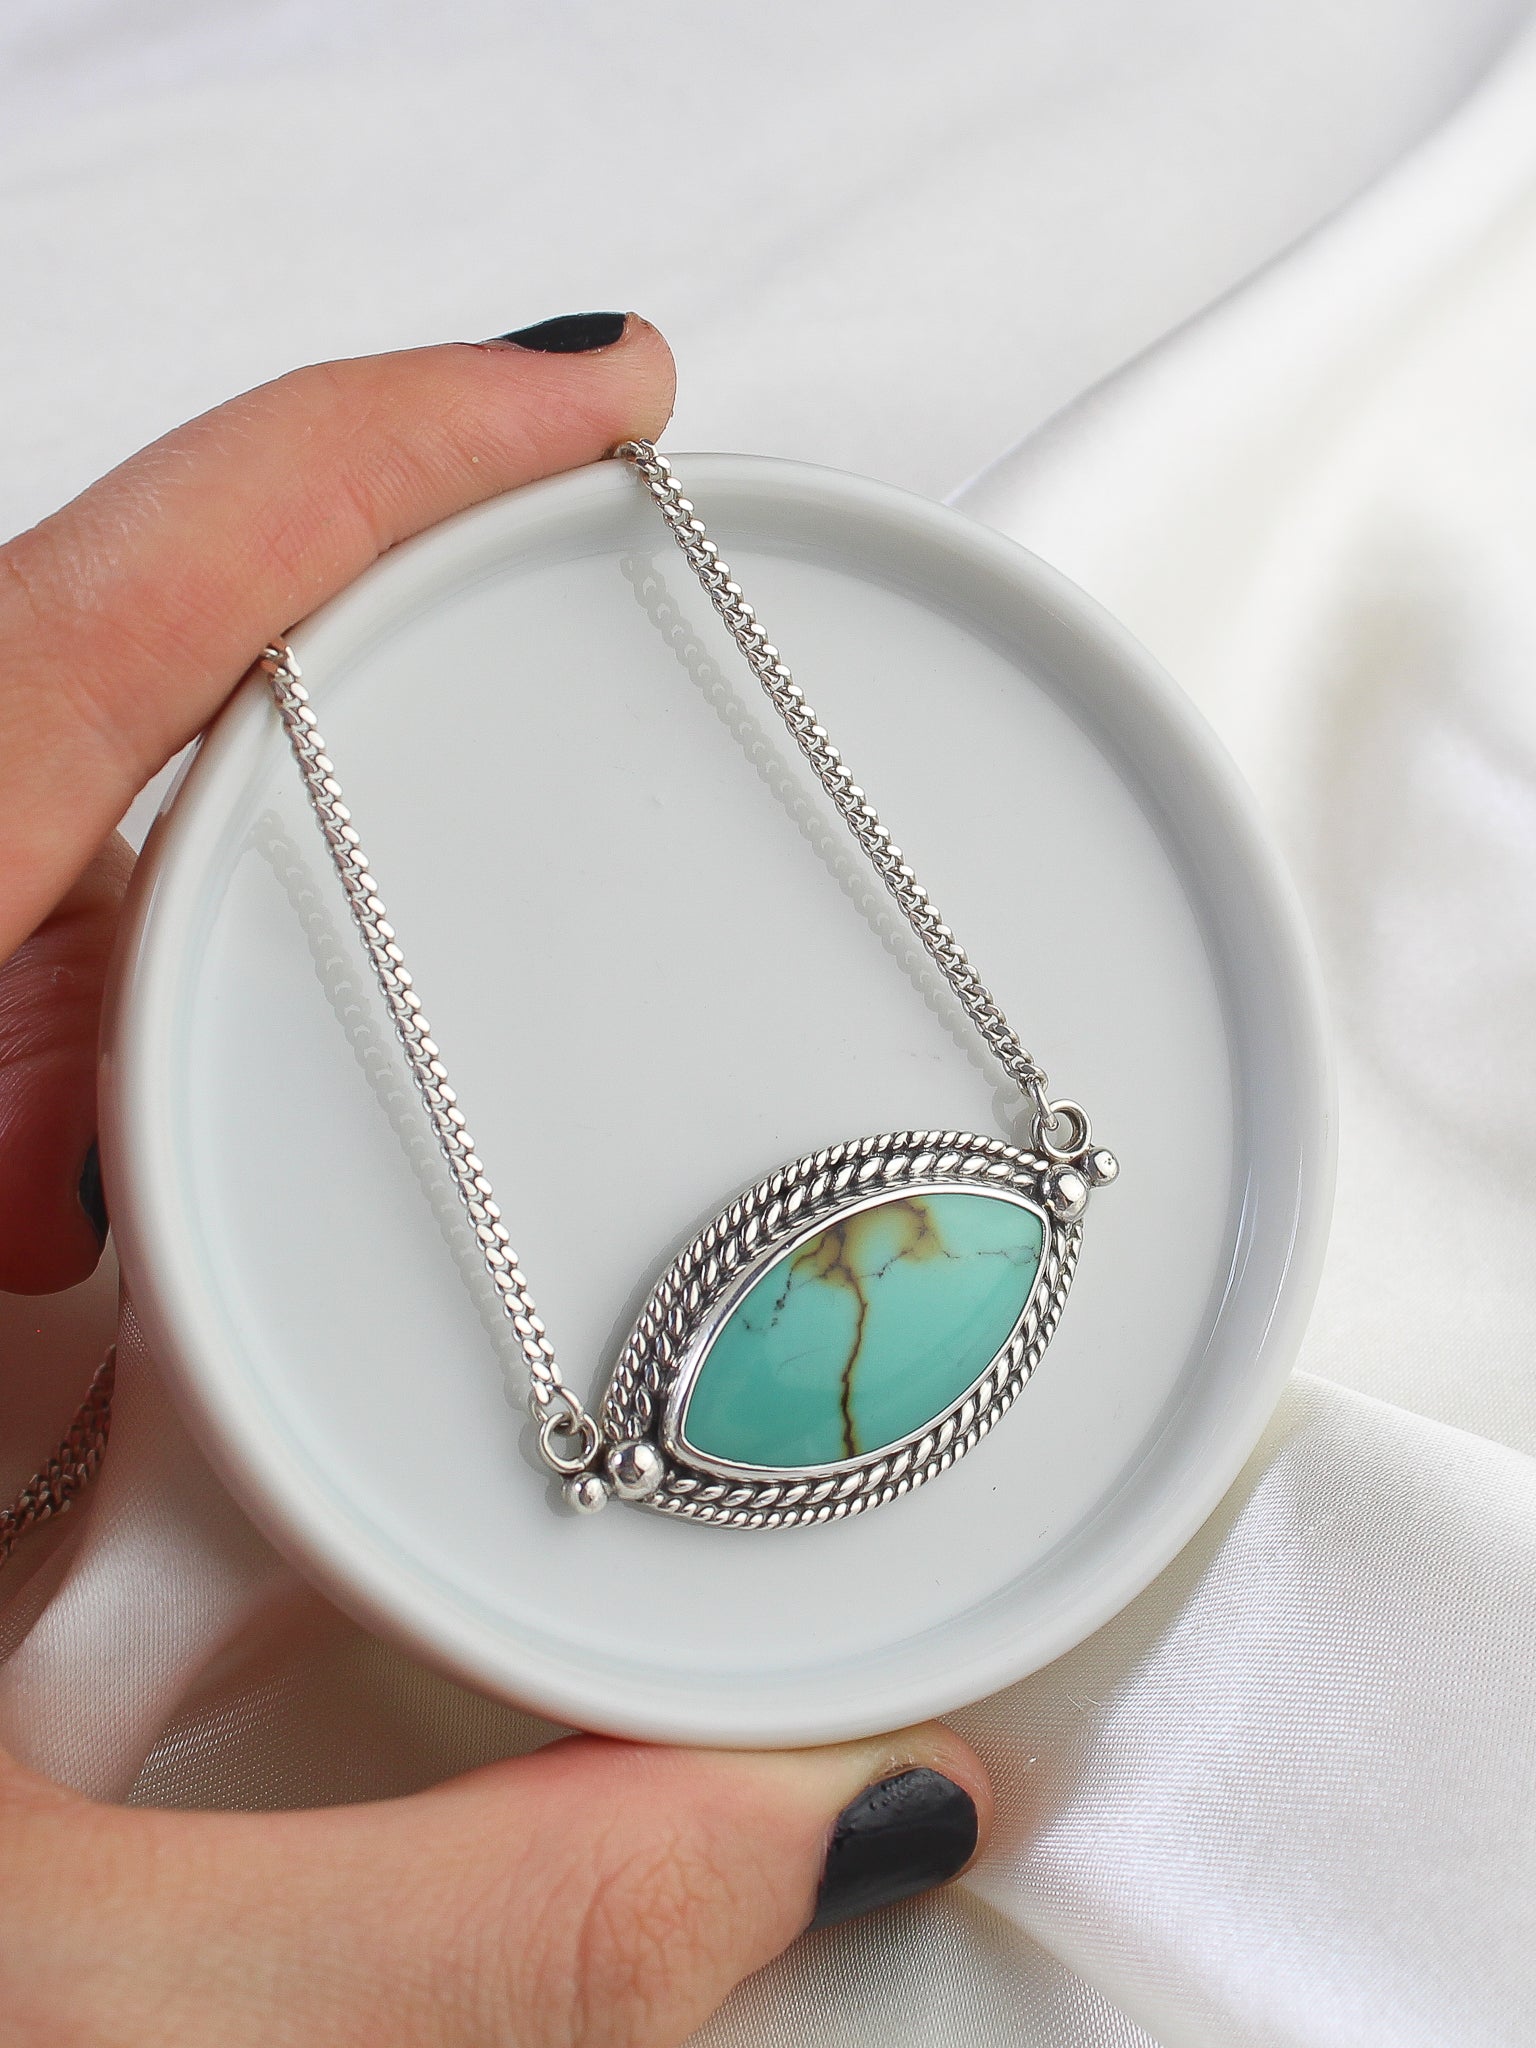 Handmade 925 sterling silver pendant with bao canyon turquoise lily and William jewelry